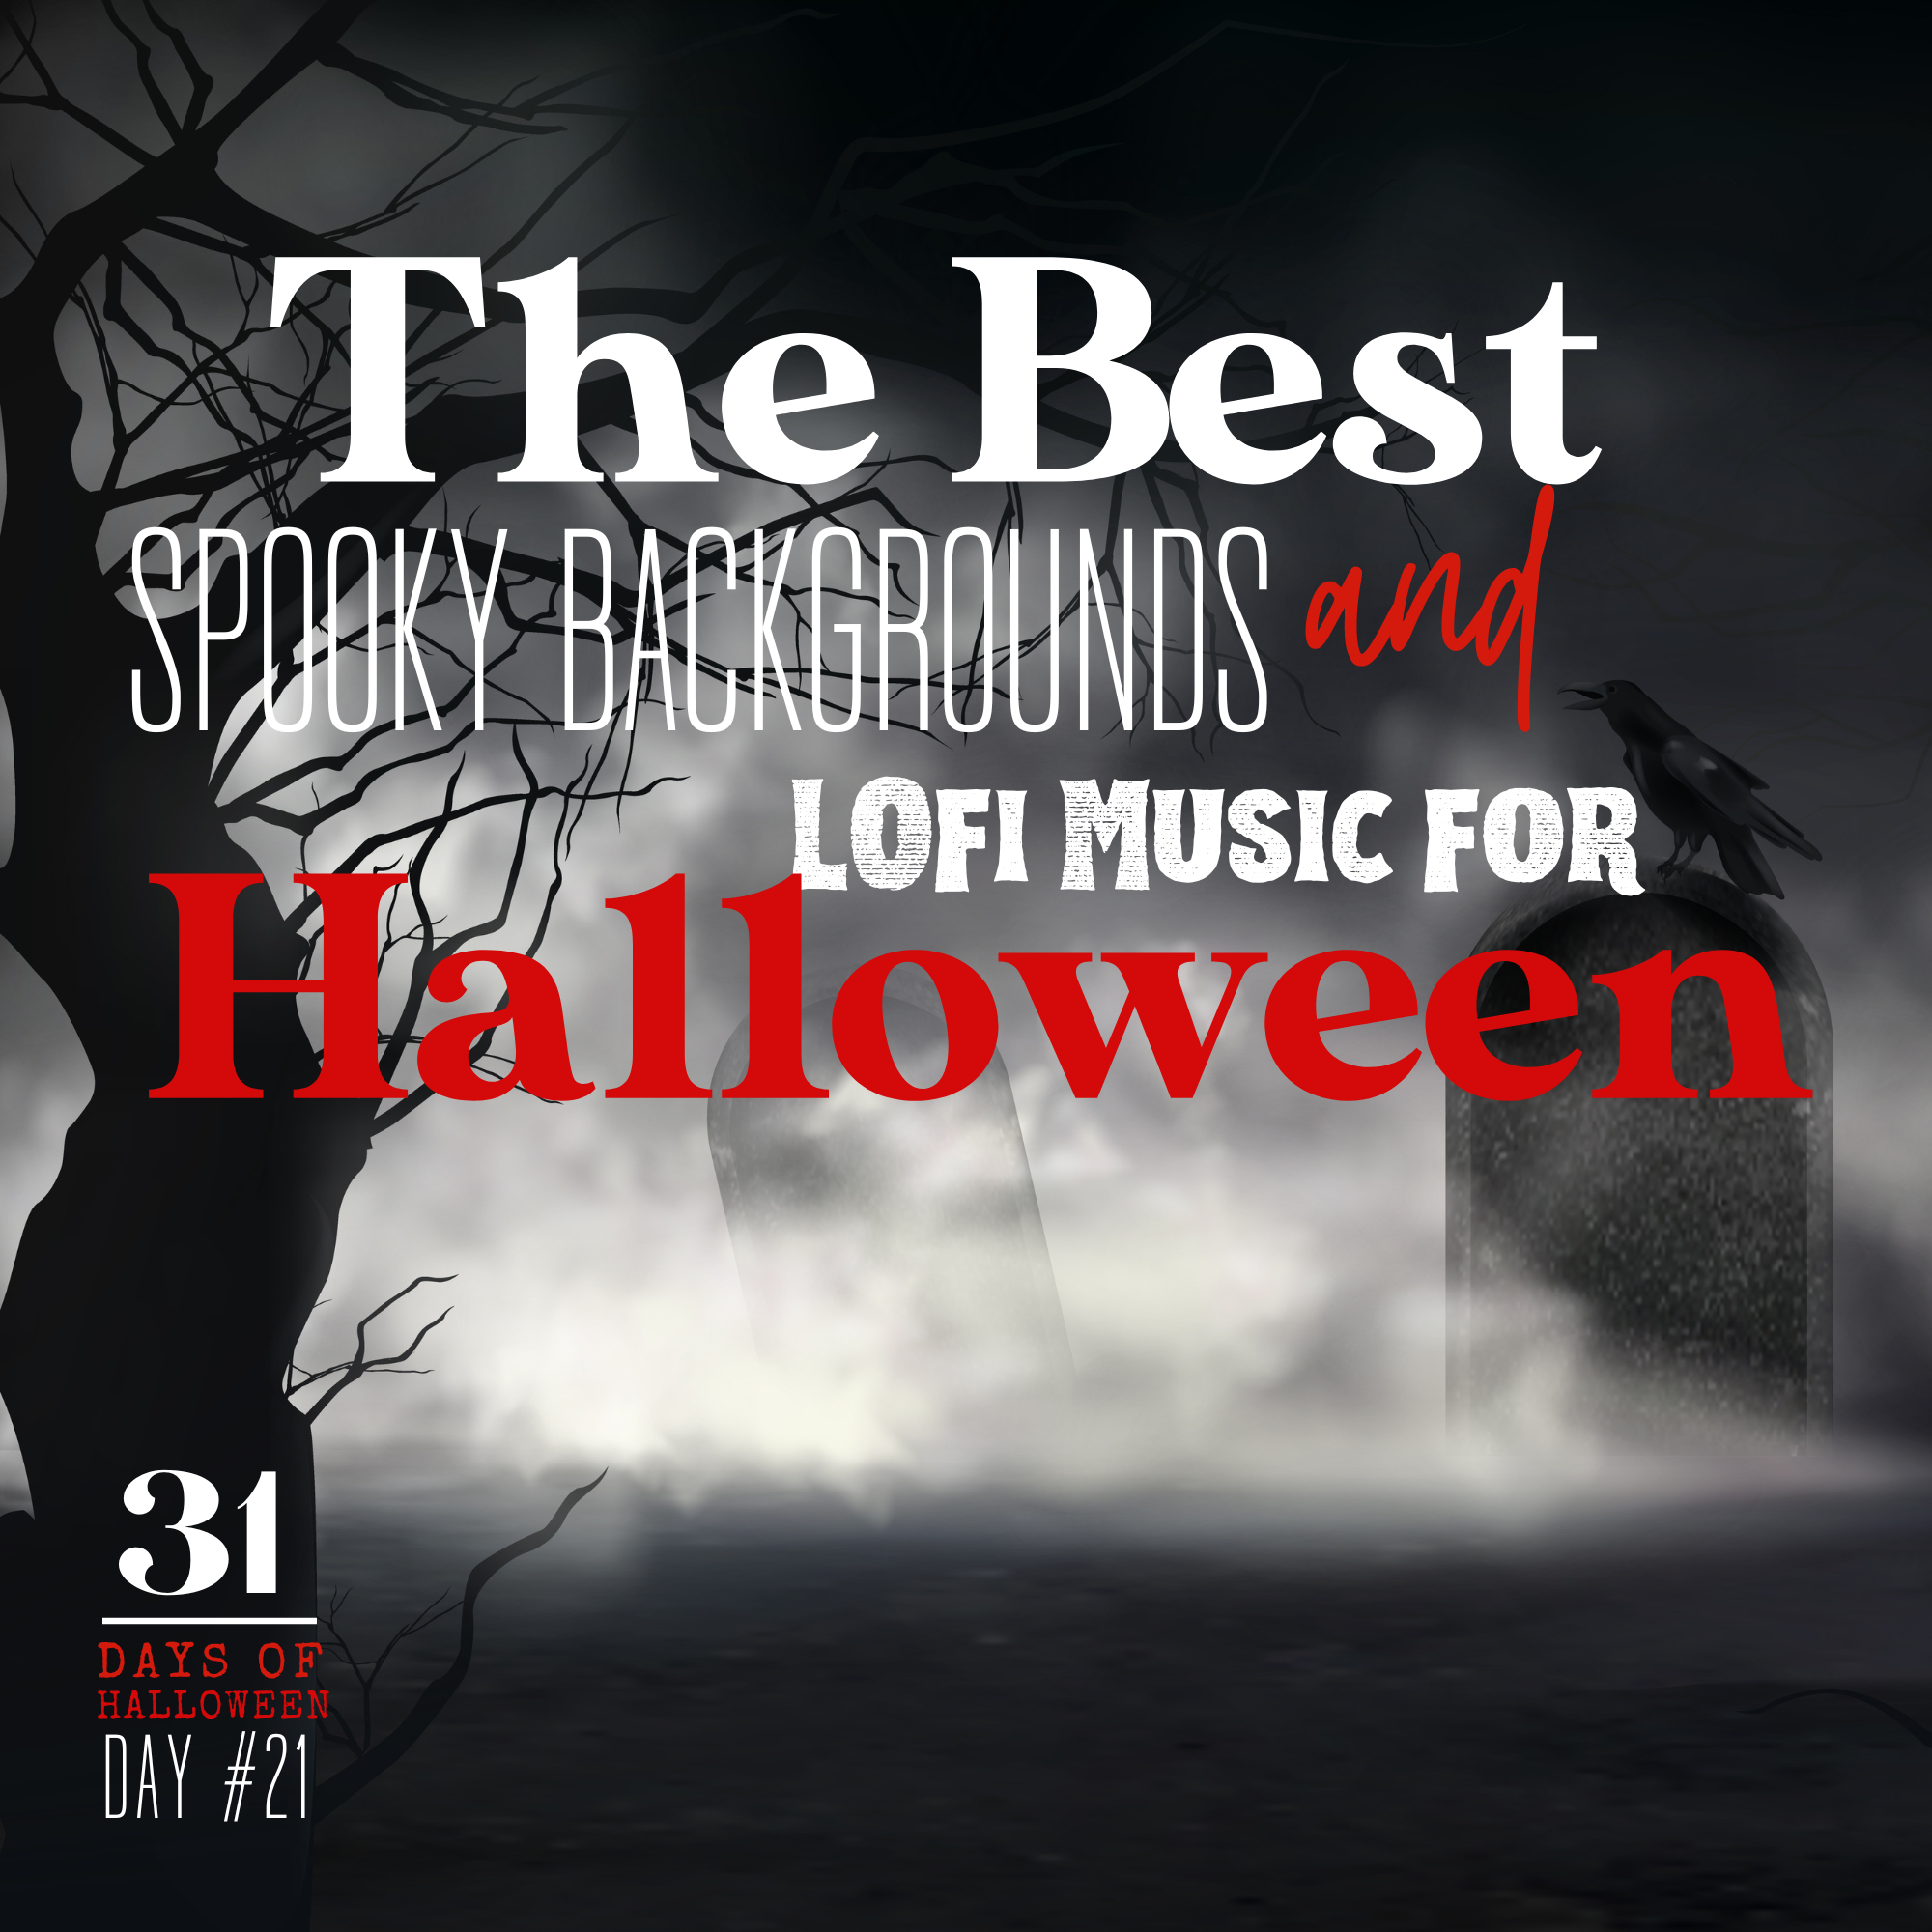 31 Days of Halloween: Day #21 … The Best Spooky Backgrounds and Lofi Music for Halloween